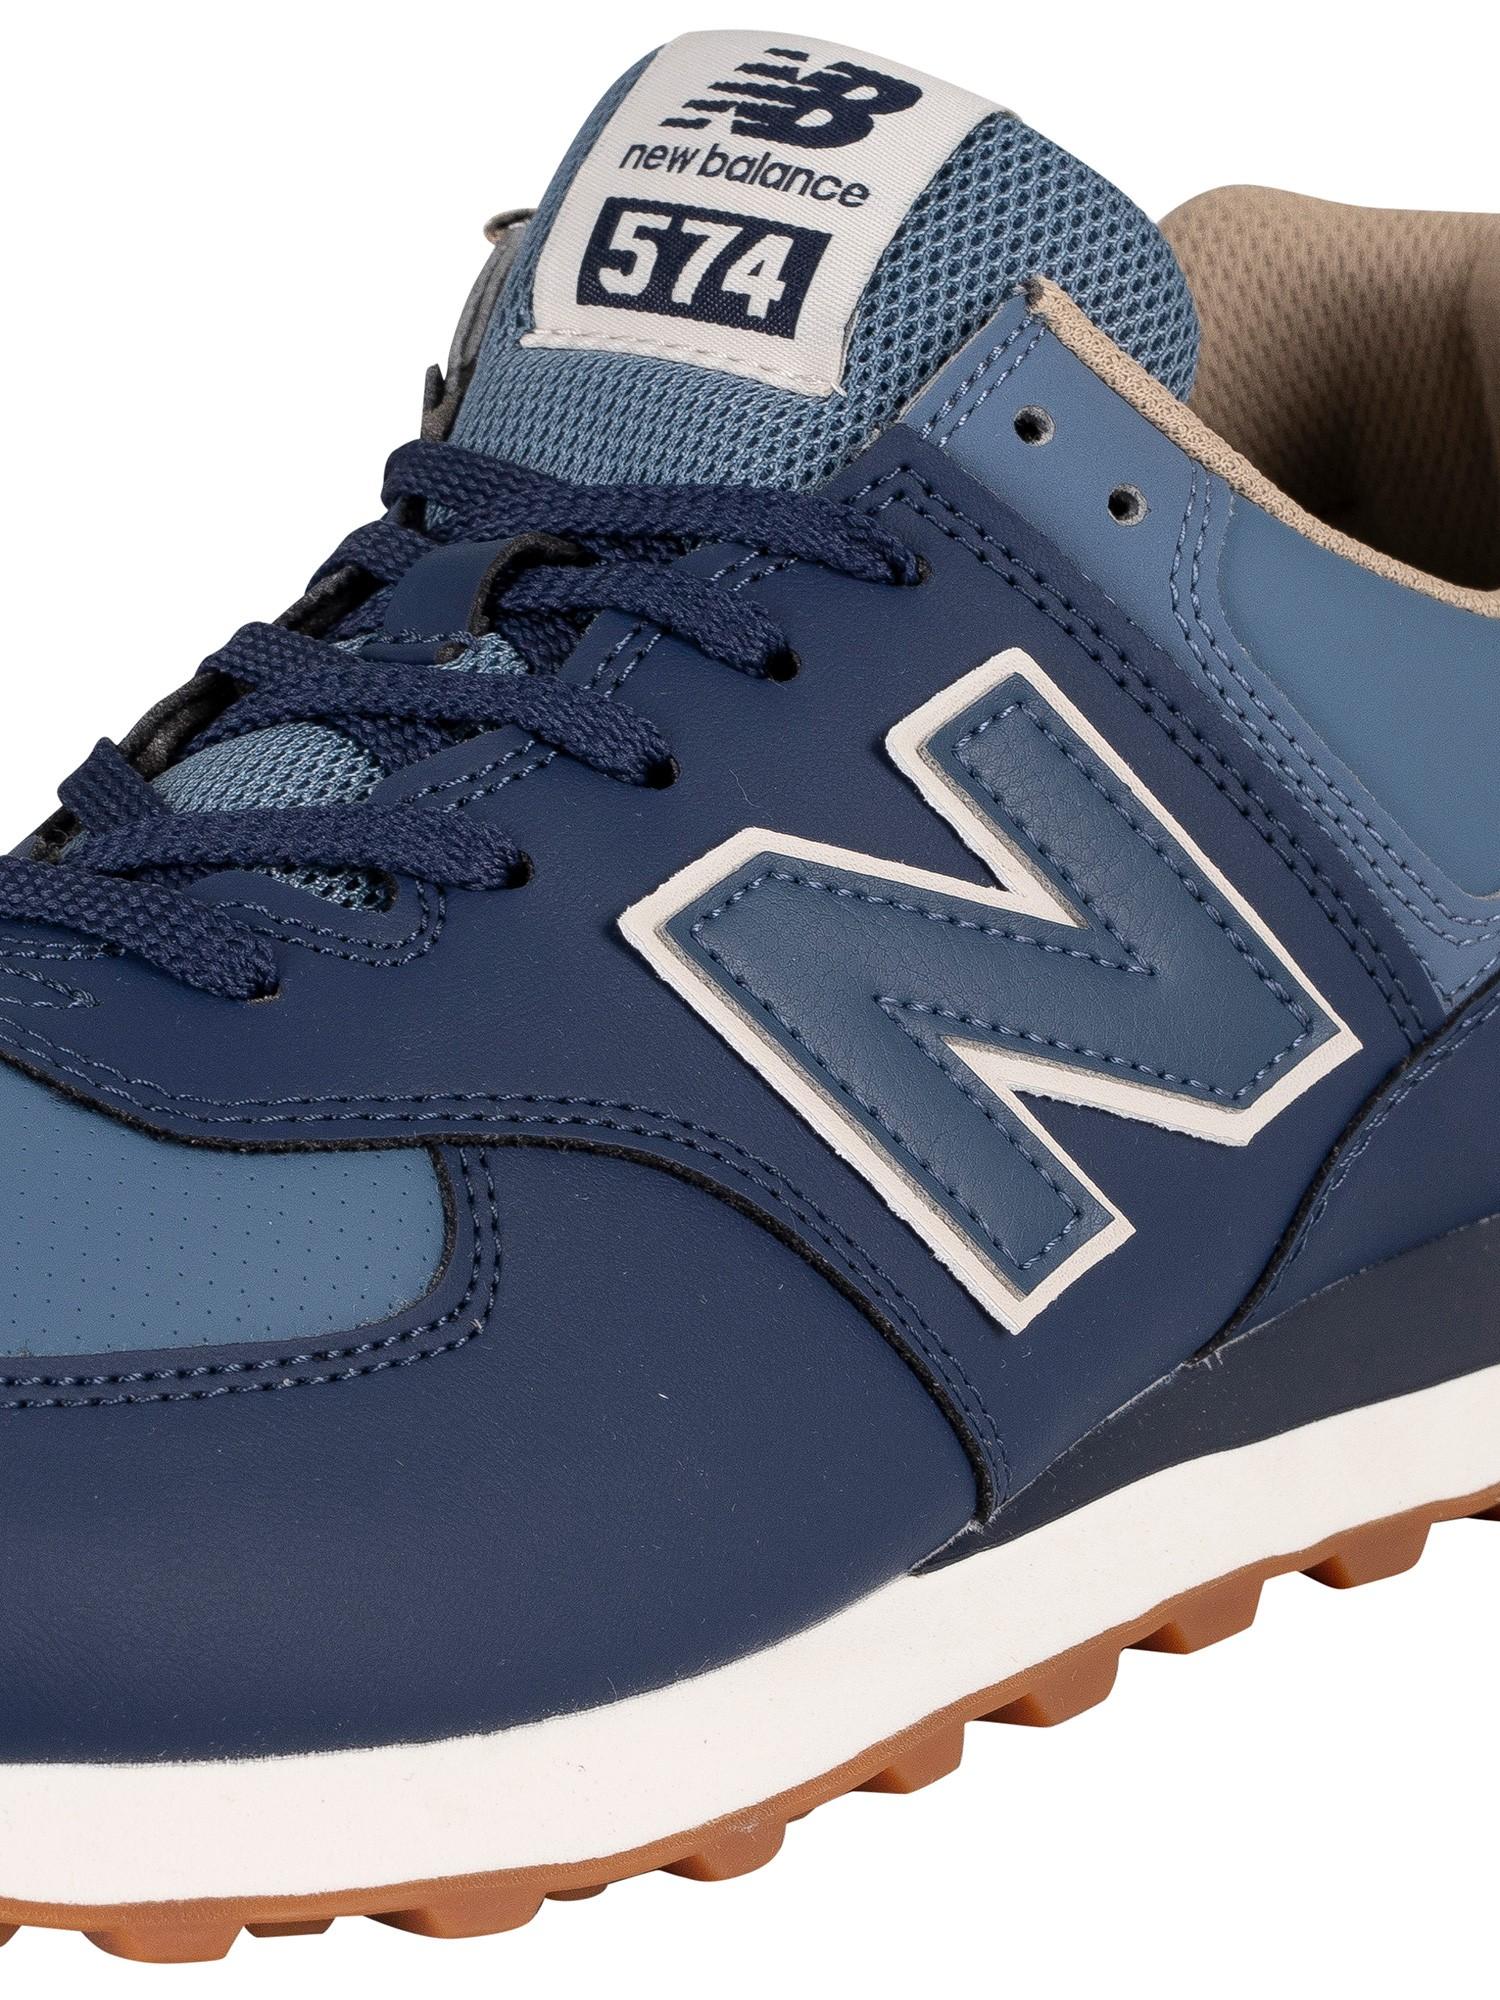 New Balance 574 Vegan Leather Trainers in Blue | Lyst